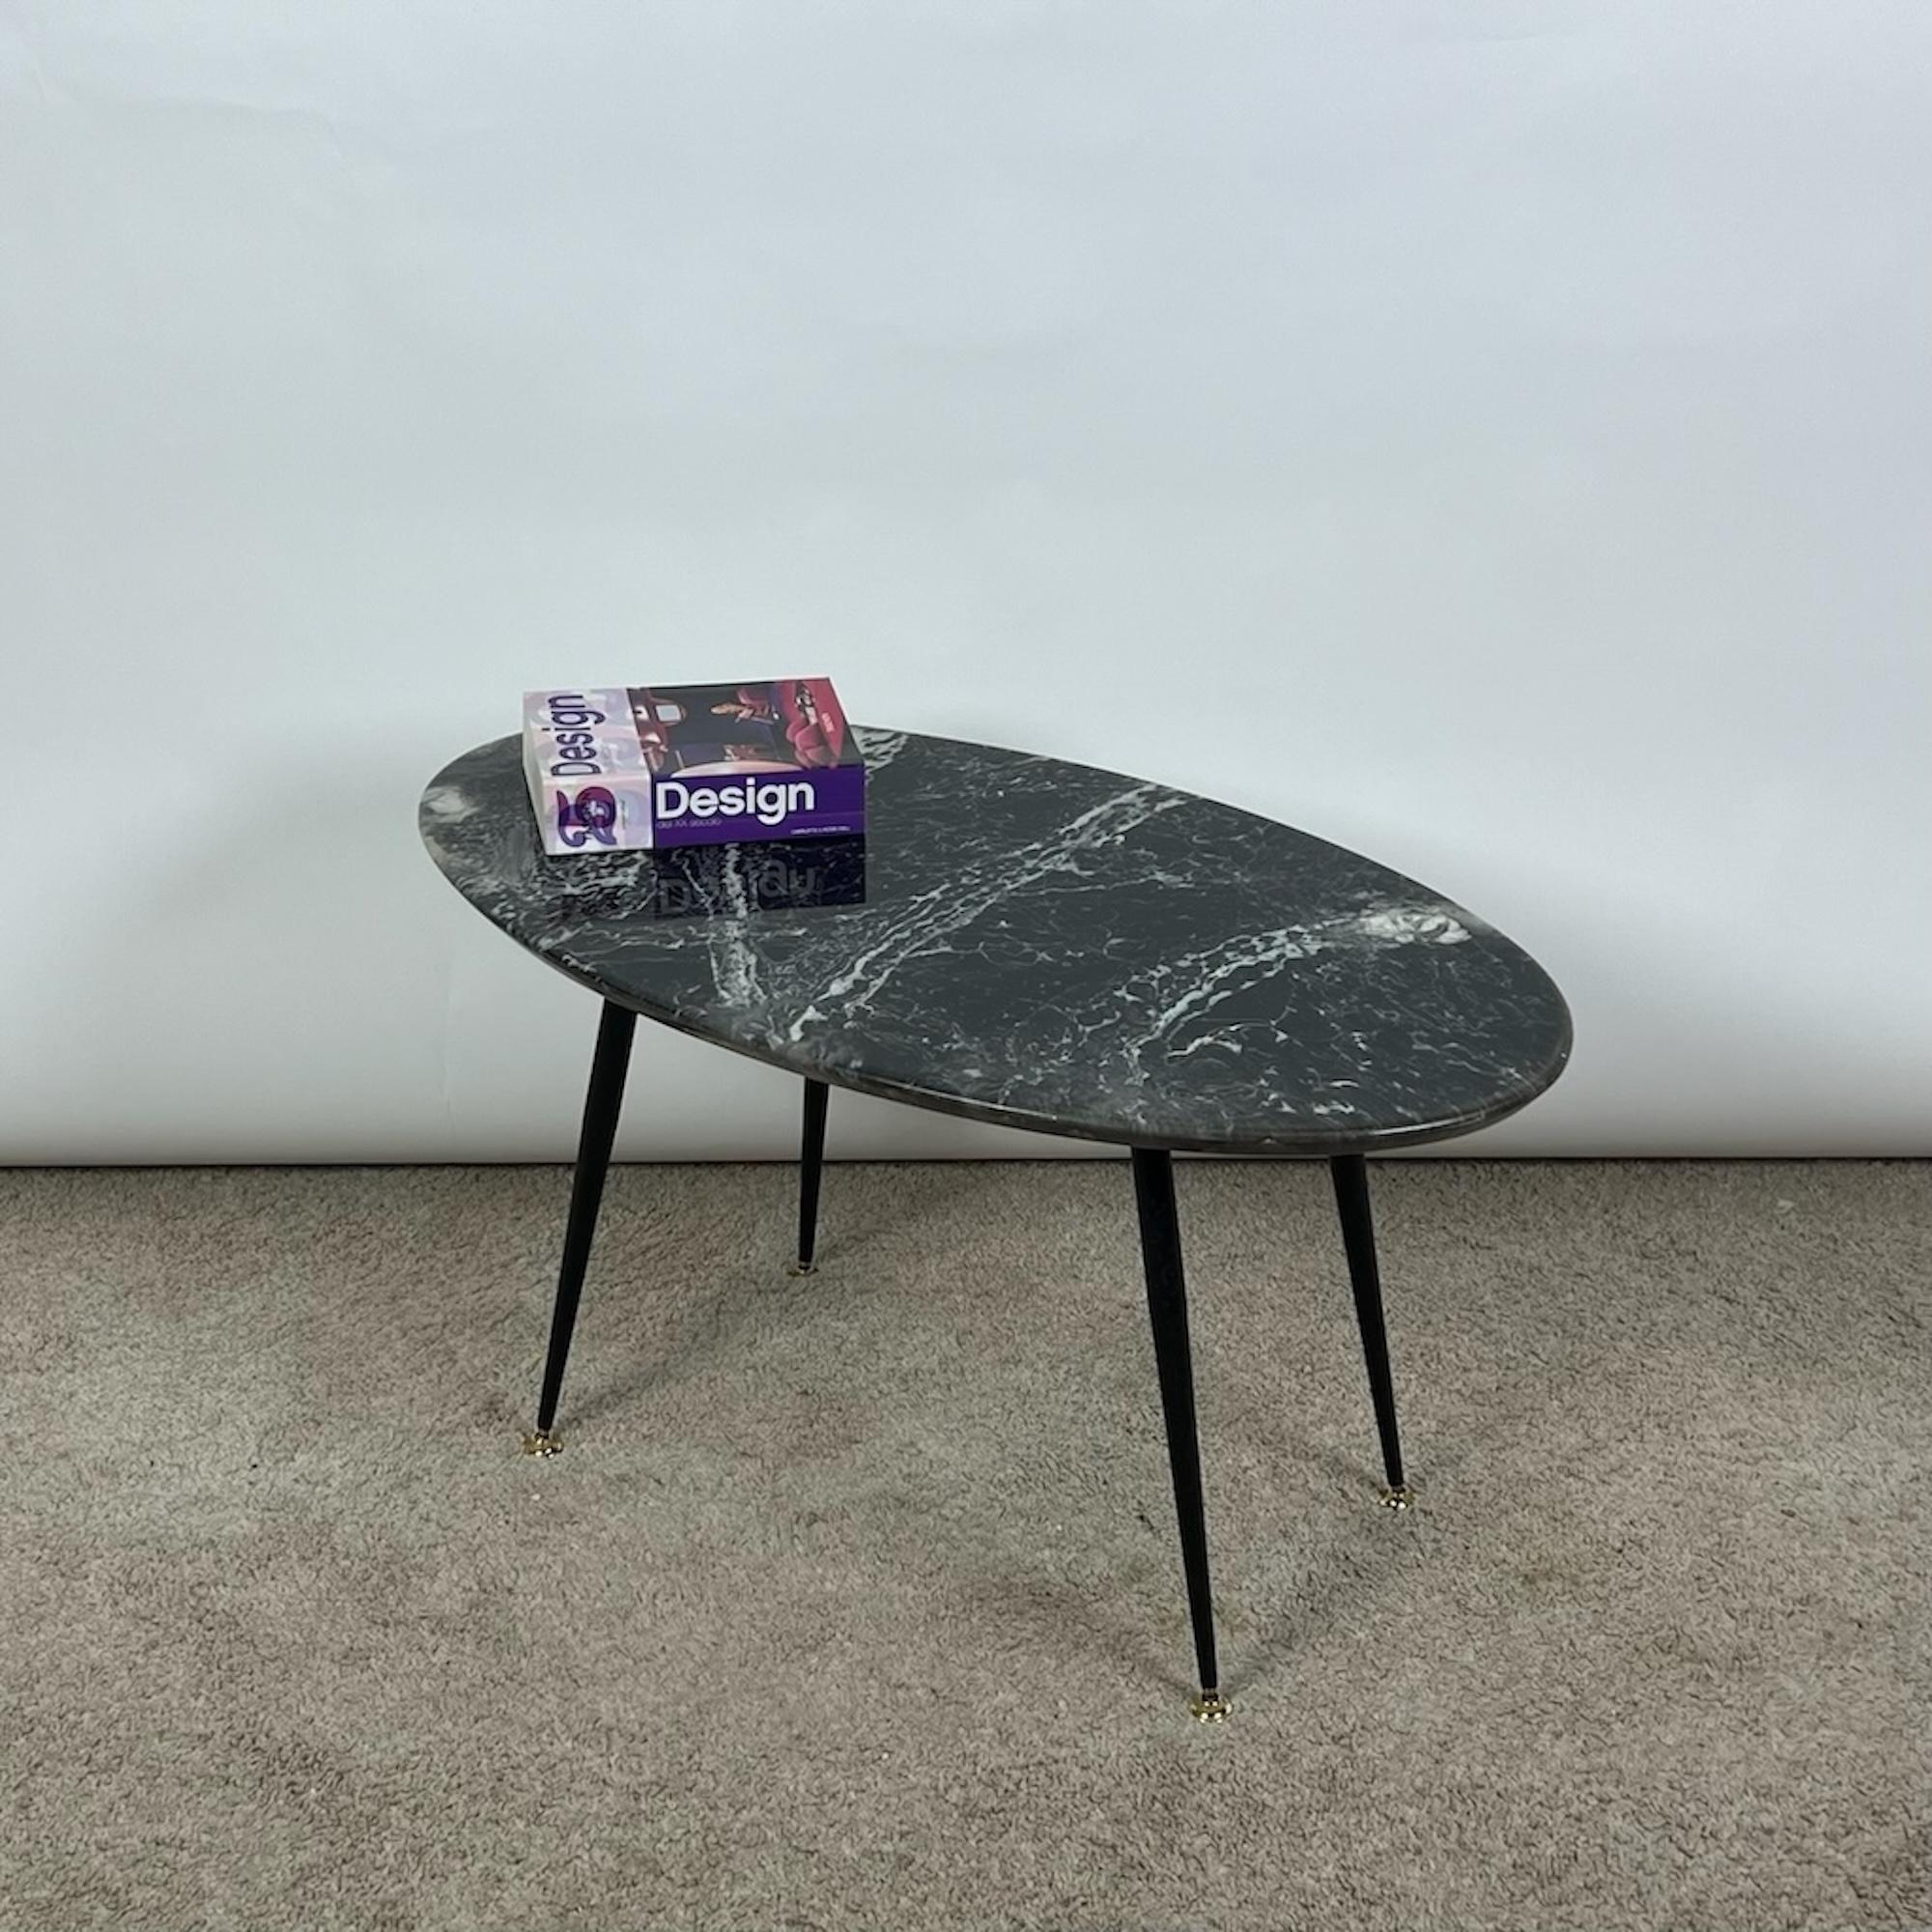 Transport yourself back to the early 1960s with this exquisite Italian vintage coffee table, a timeless piece that exudes vintage elegance and versatility. Crafted with meticulous attention to detail, this lovely low table features an oval faux